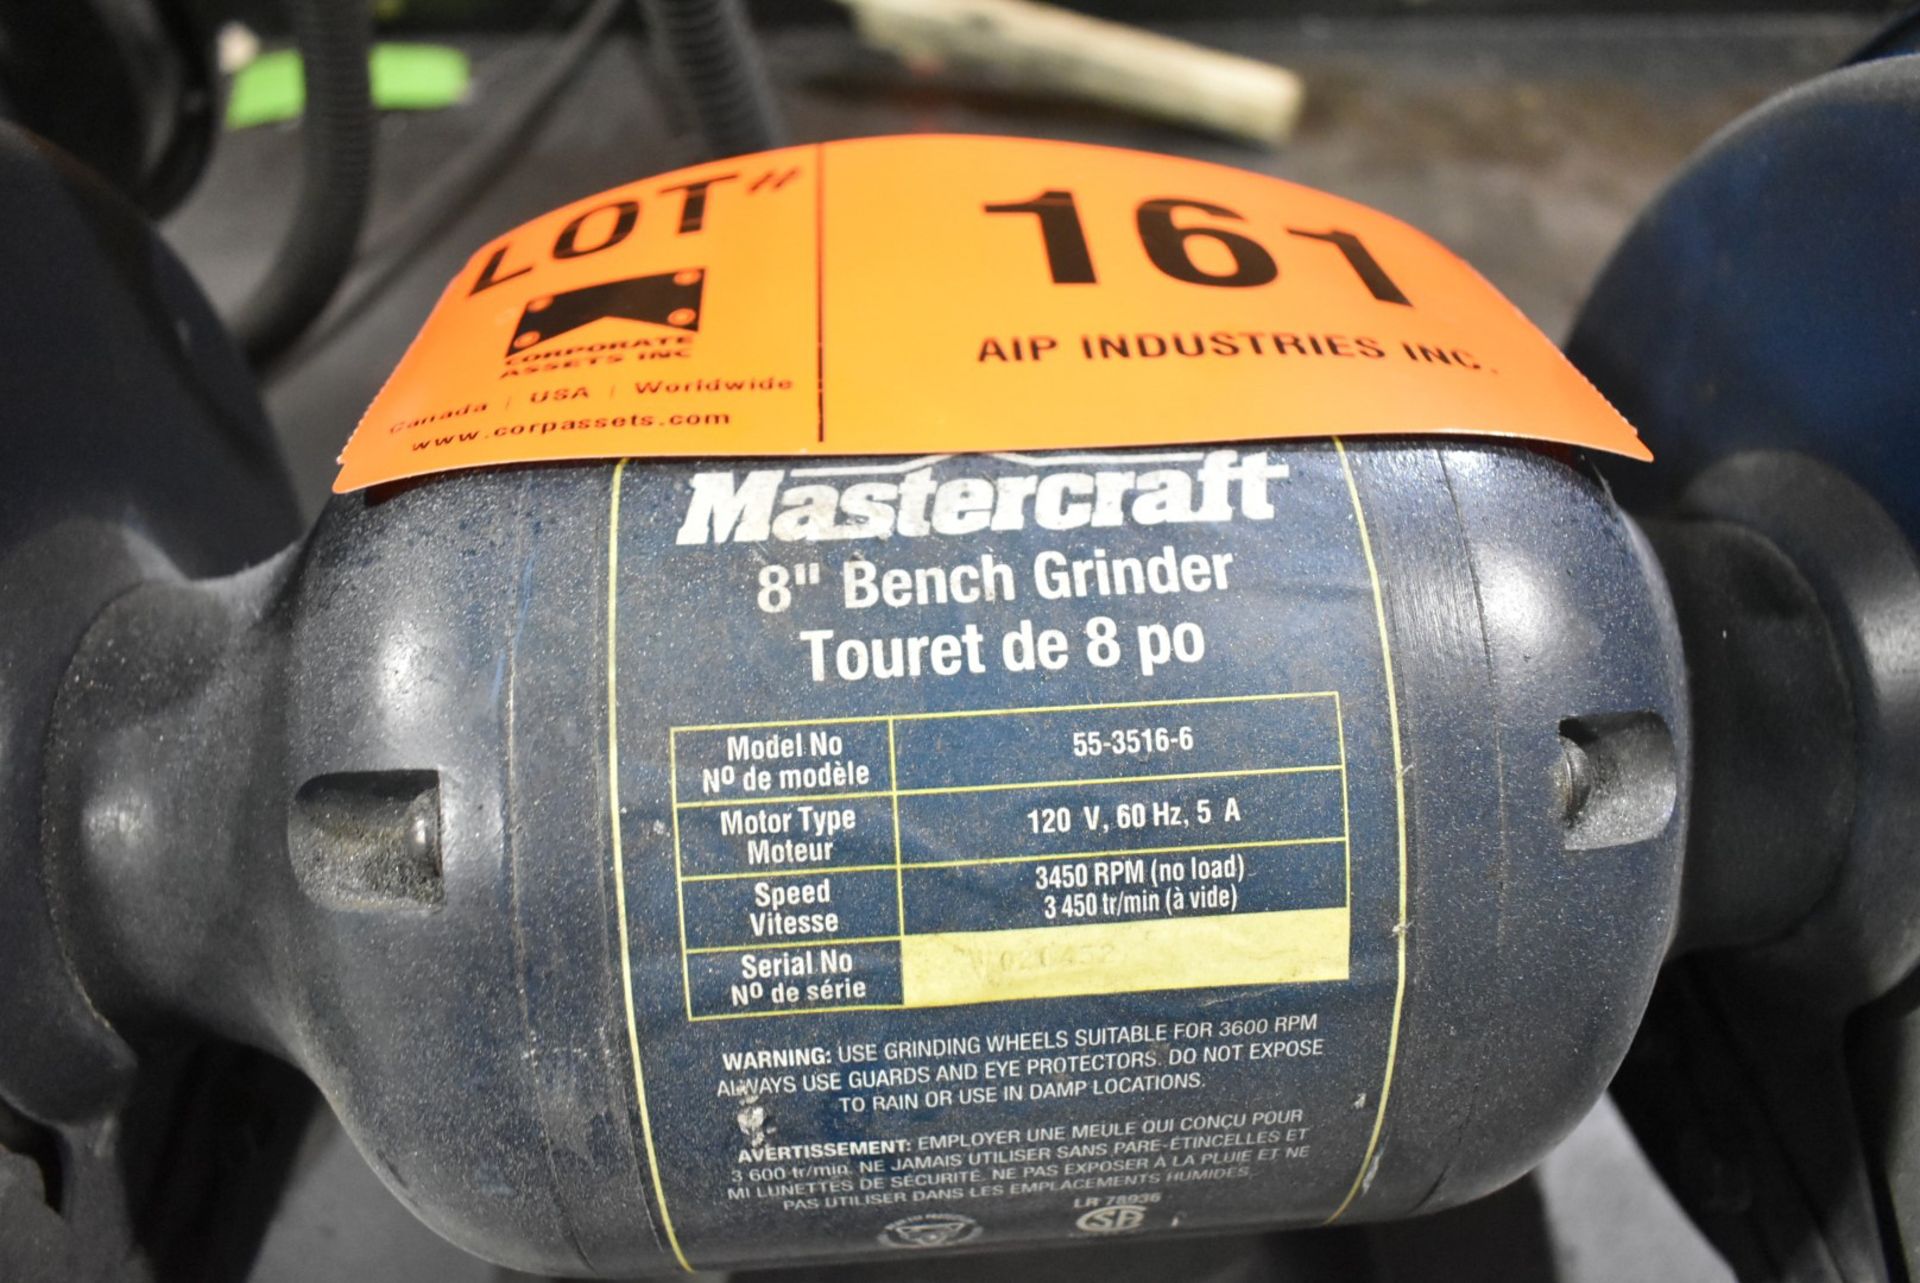 MASTERCRAFT 8" BENCH GRINDER [RIGGING FOR LOT #161 - $25 CAD PLUS APPLICABLE TAXES] - Image 2 of 2